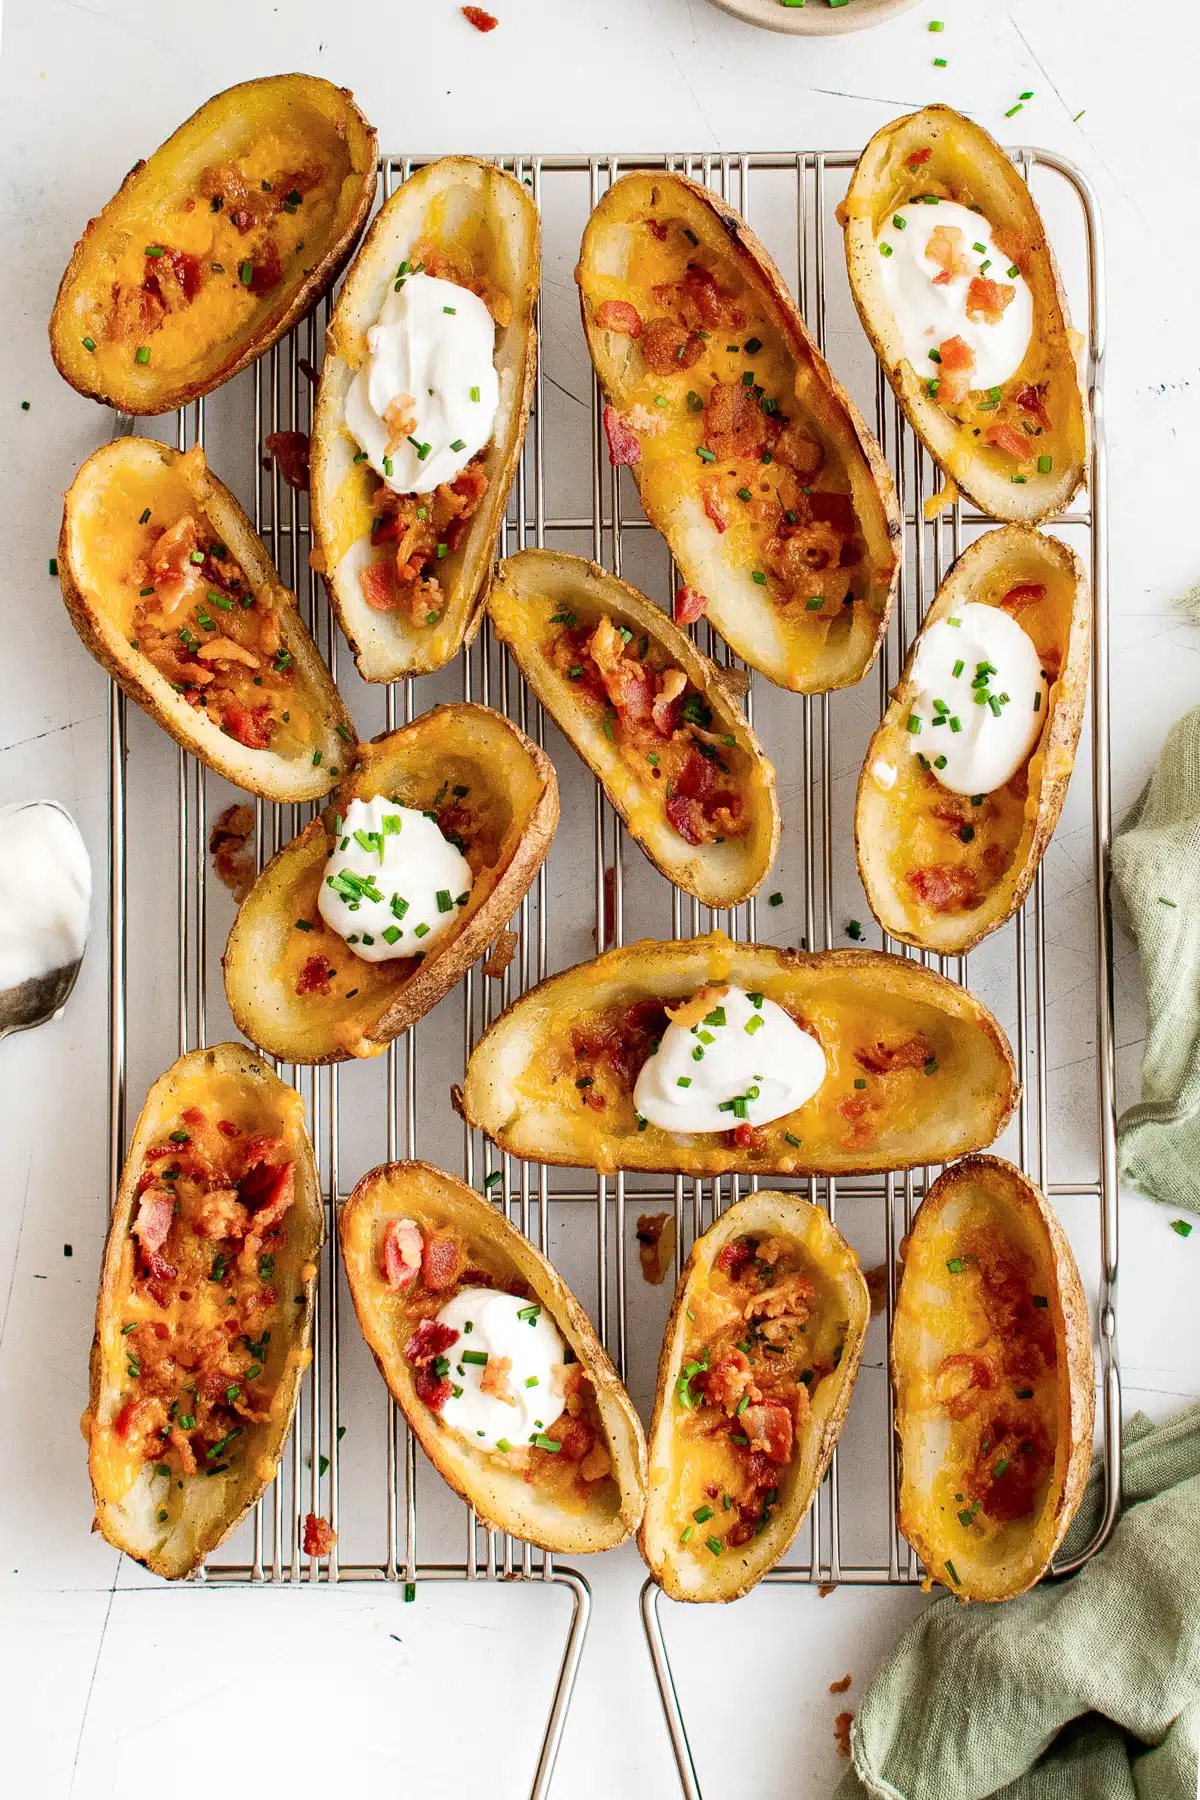 Thirteen potato skins filled with cheese, bacon, chives, and some with sour cream on a wire cooking rack.